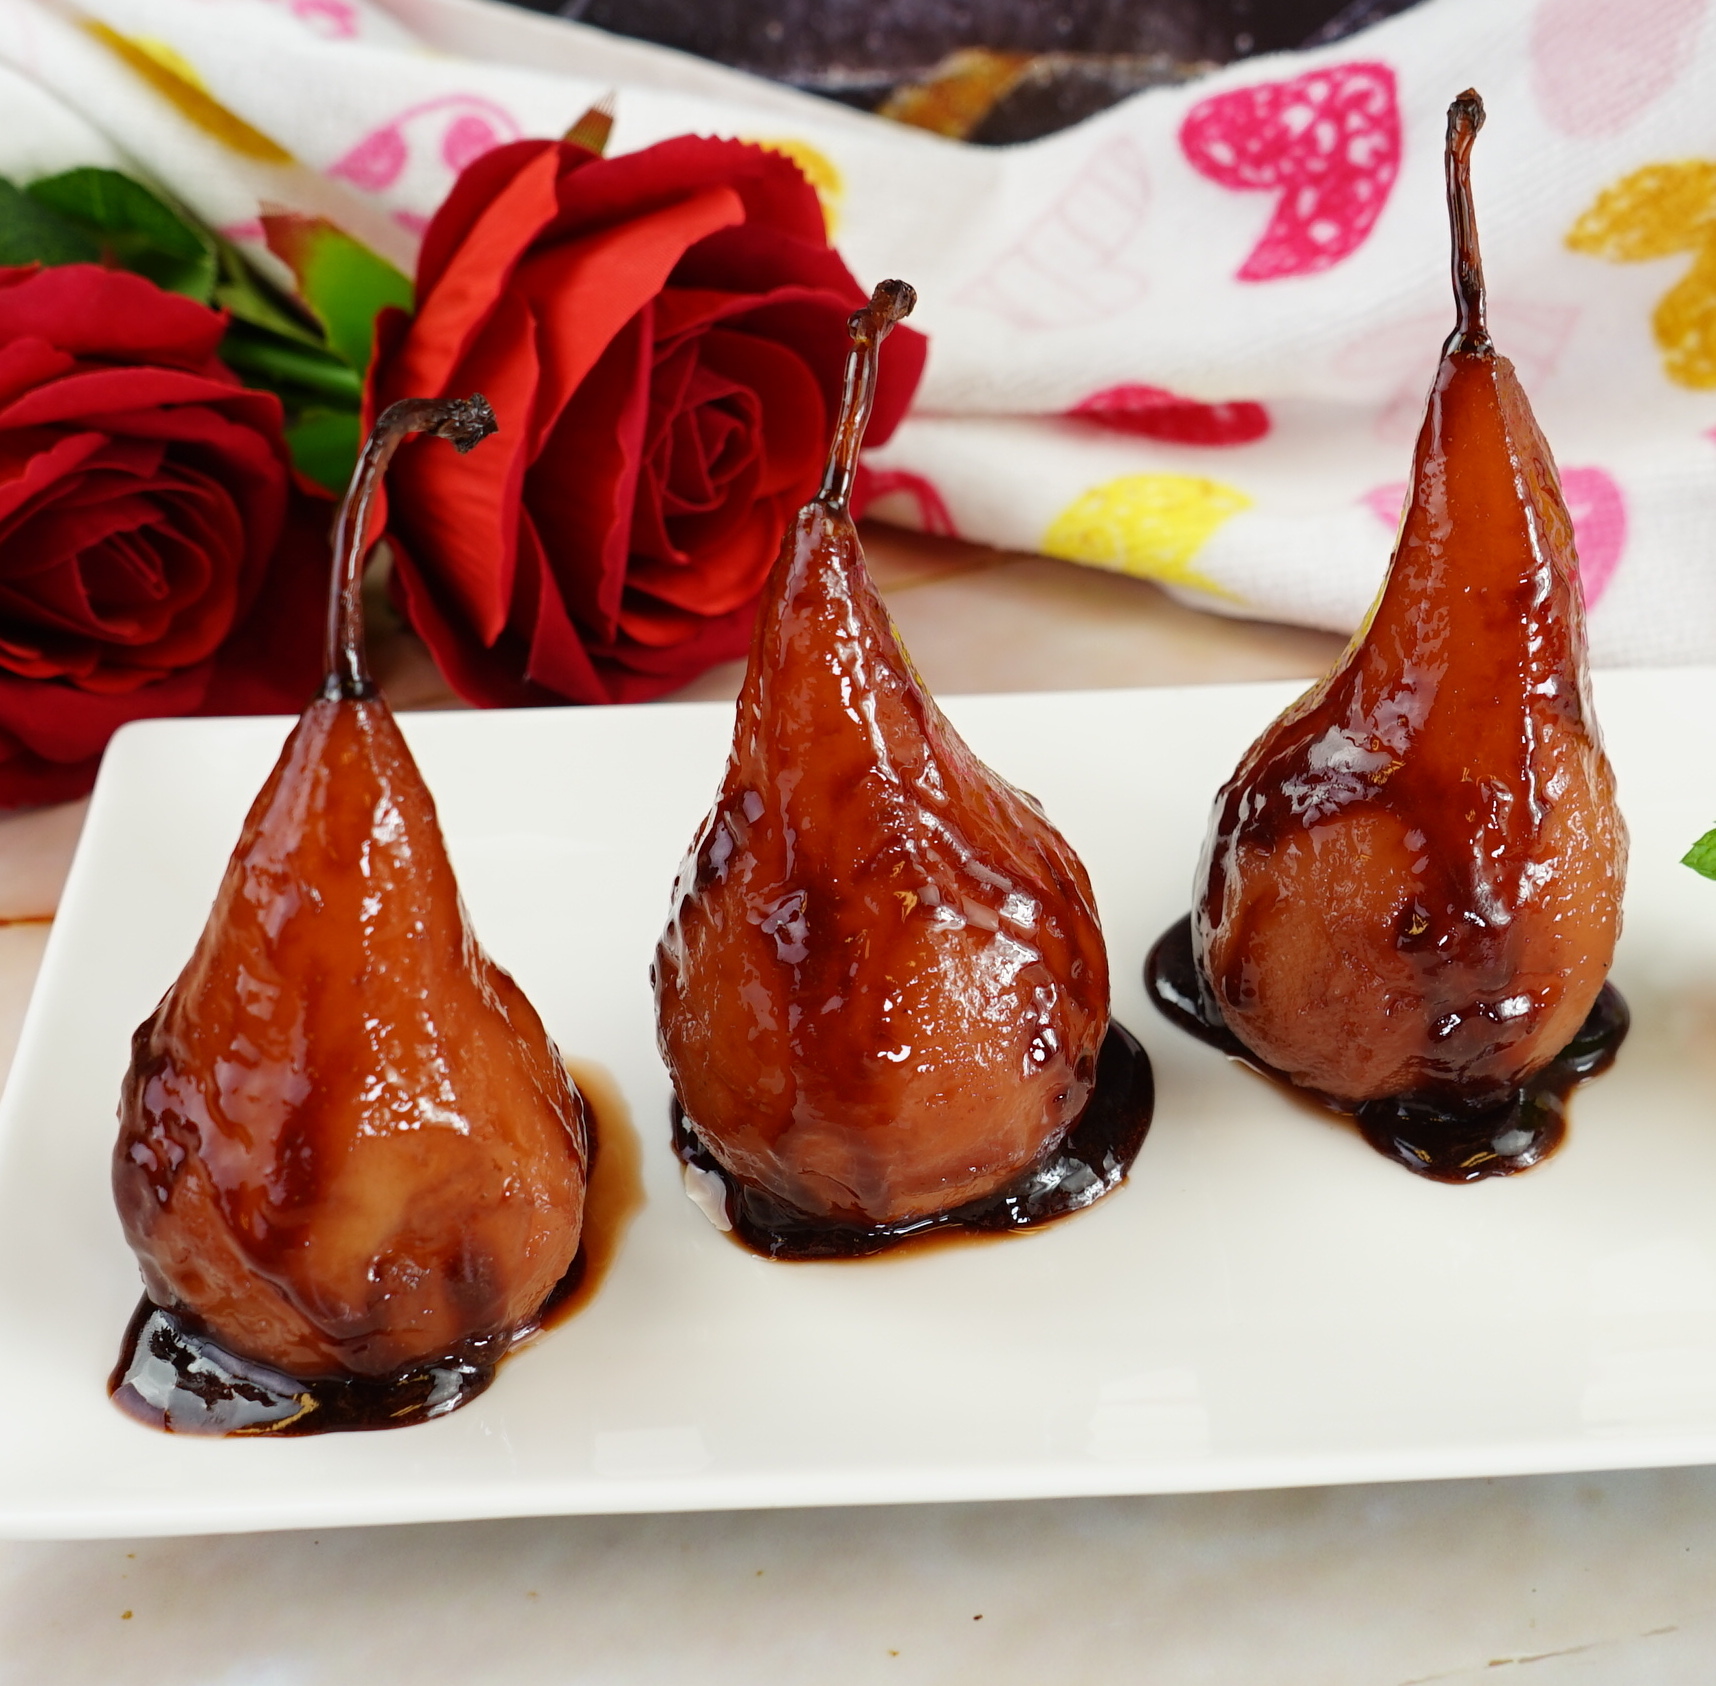 Poached Pears in Spiced Red Wine